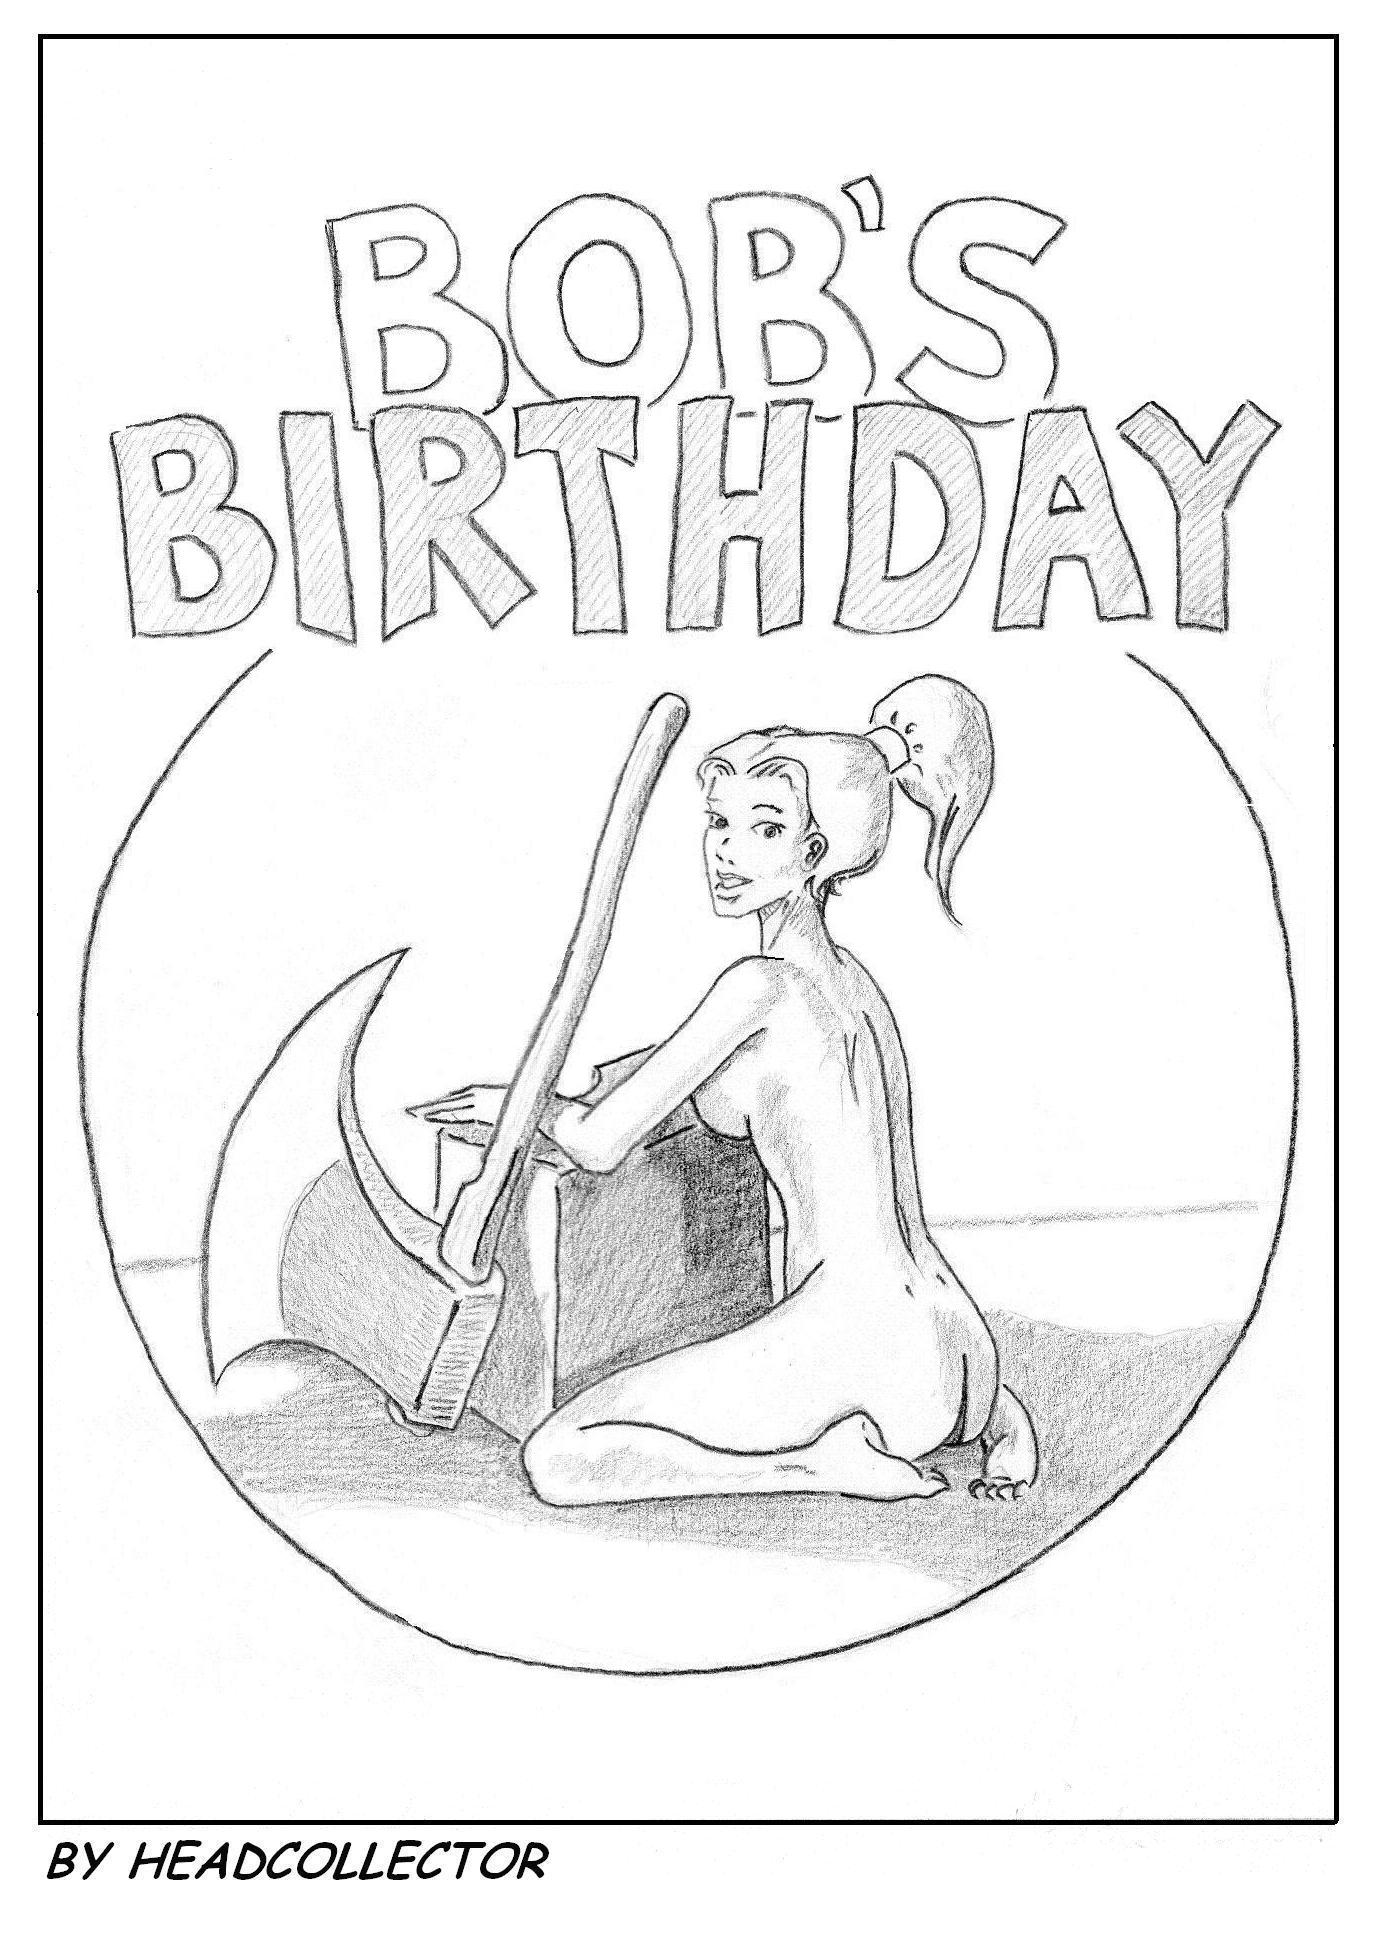 Bobs Birthday by Headcollector0